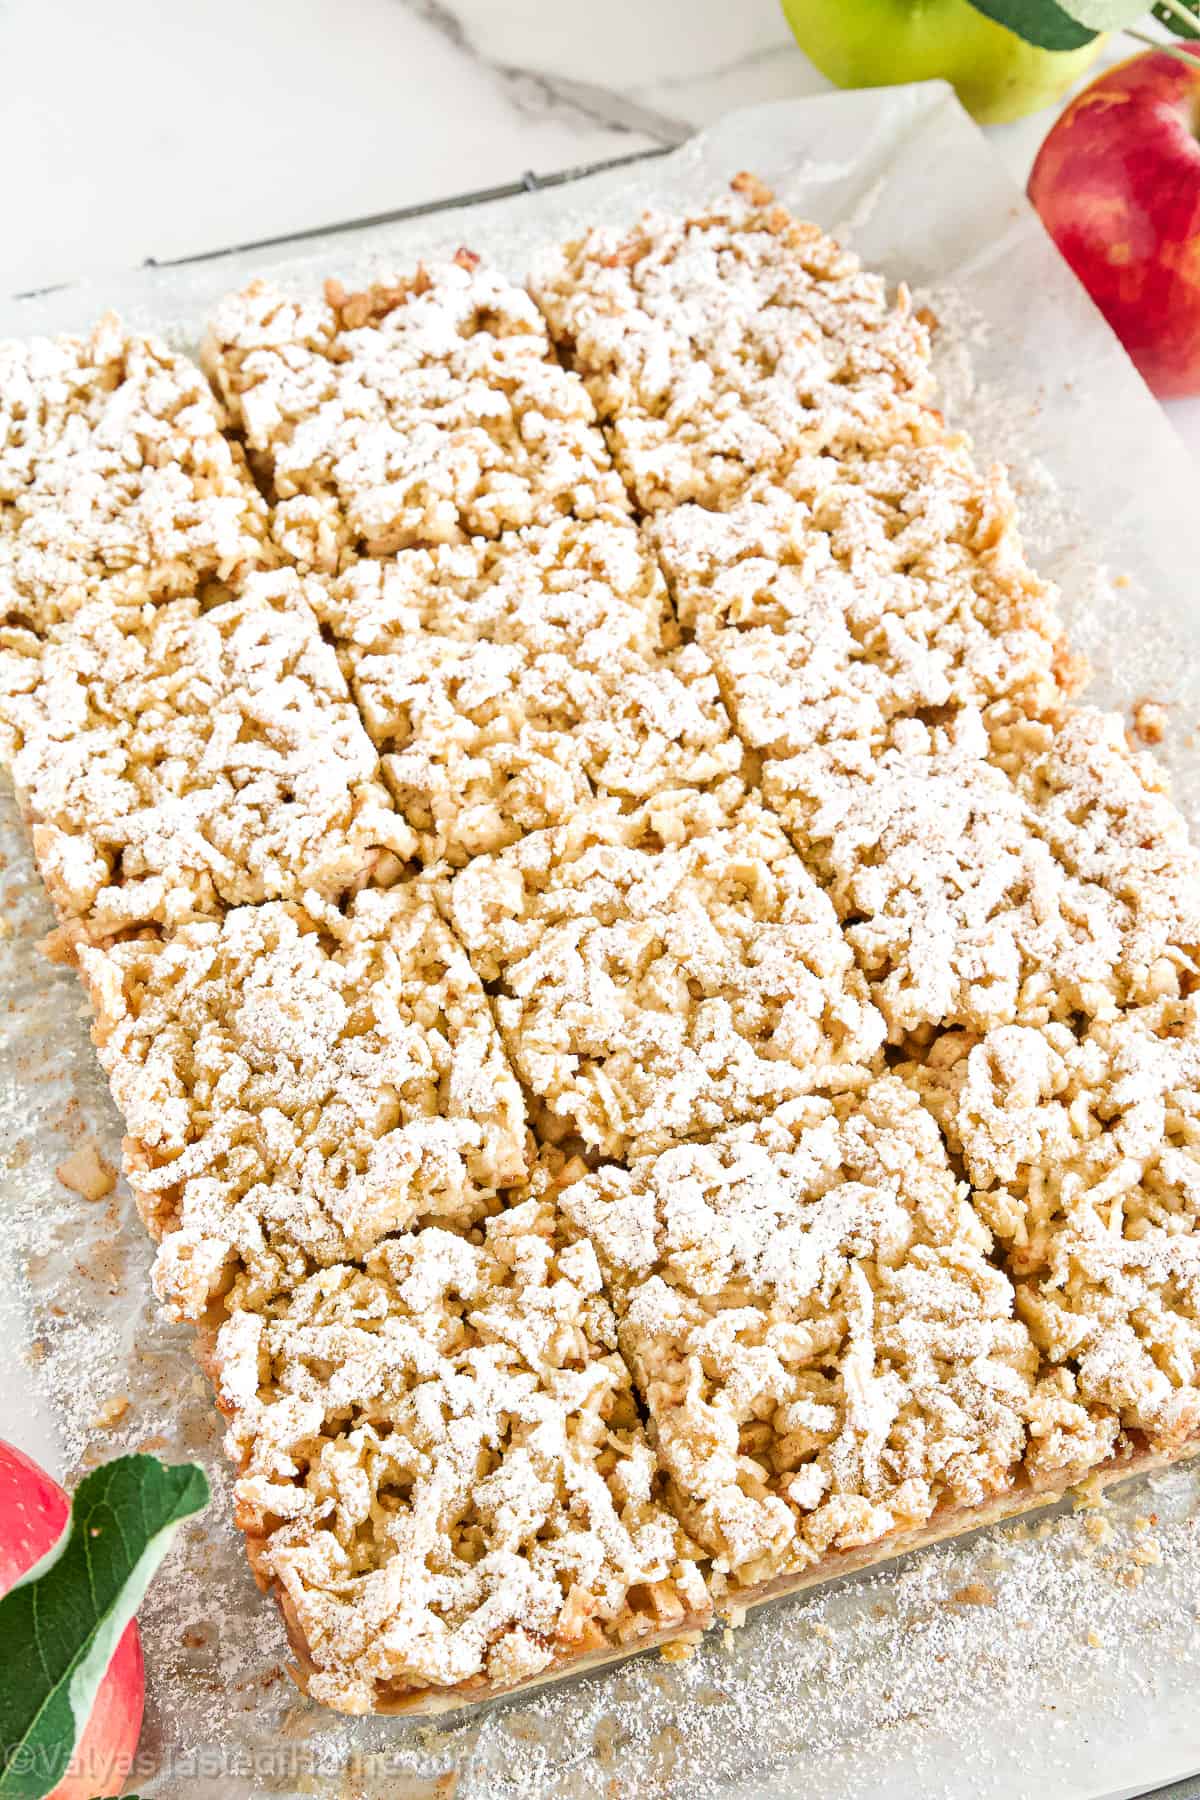 These bars are rich with flavors of cinnamon and apple and will make a beautiful dessert on your Thanksgiving table.